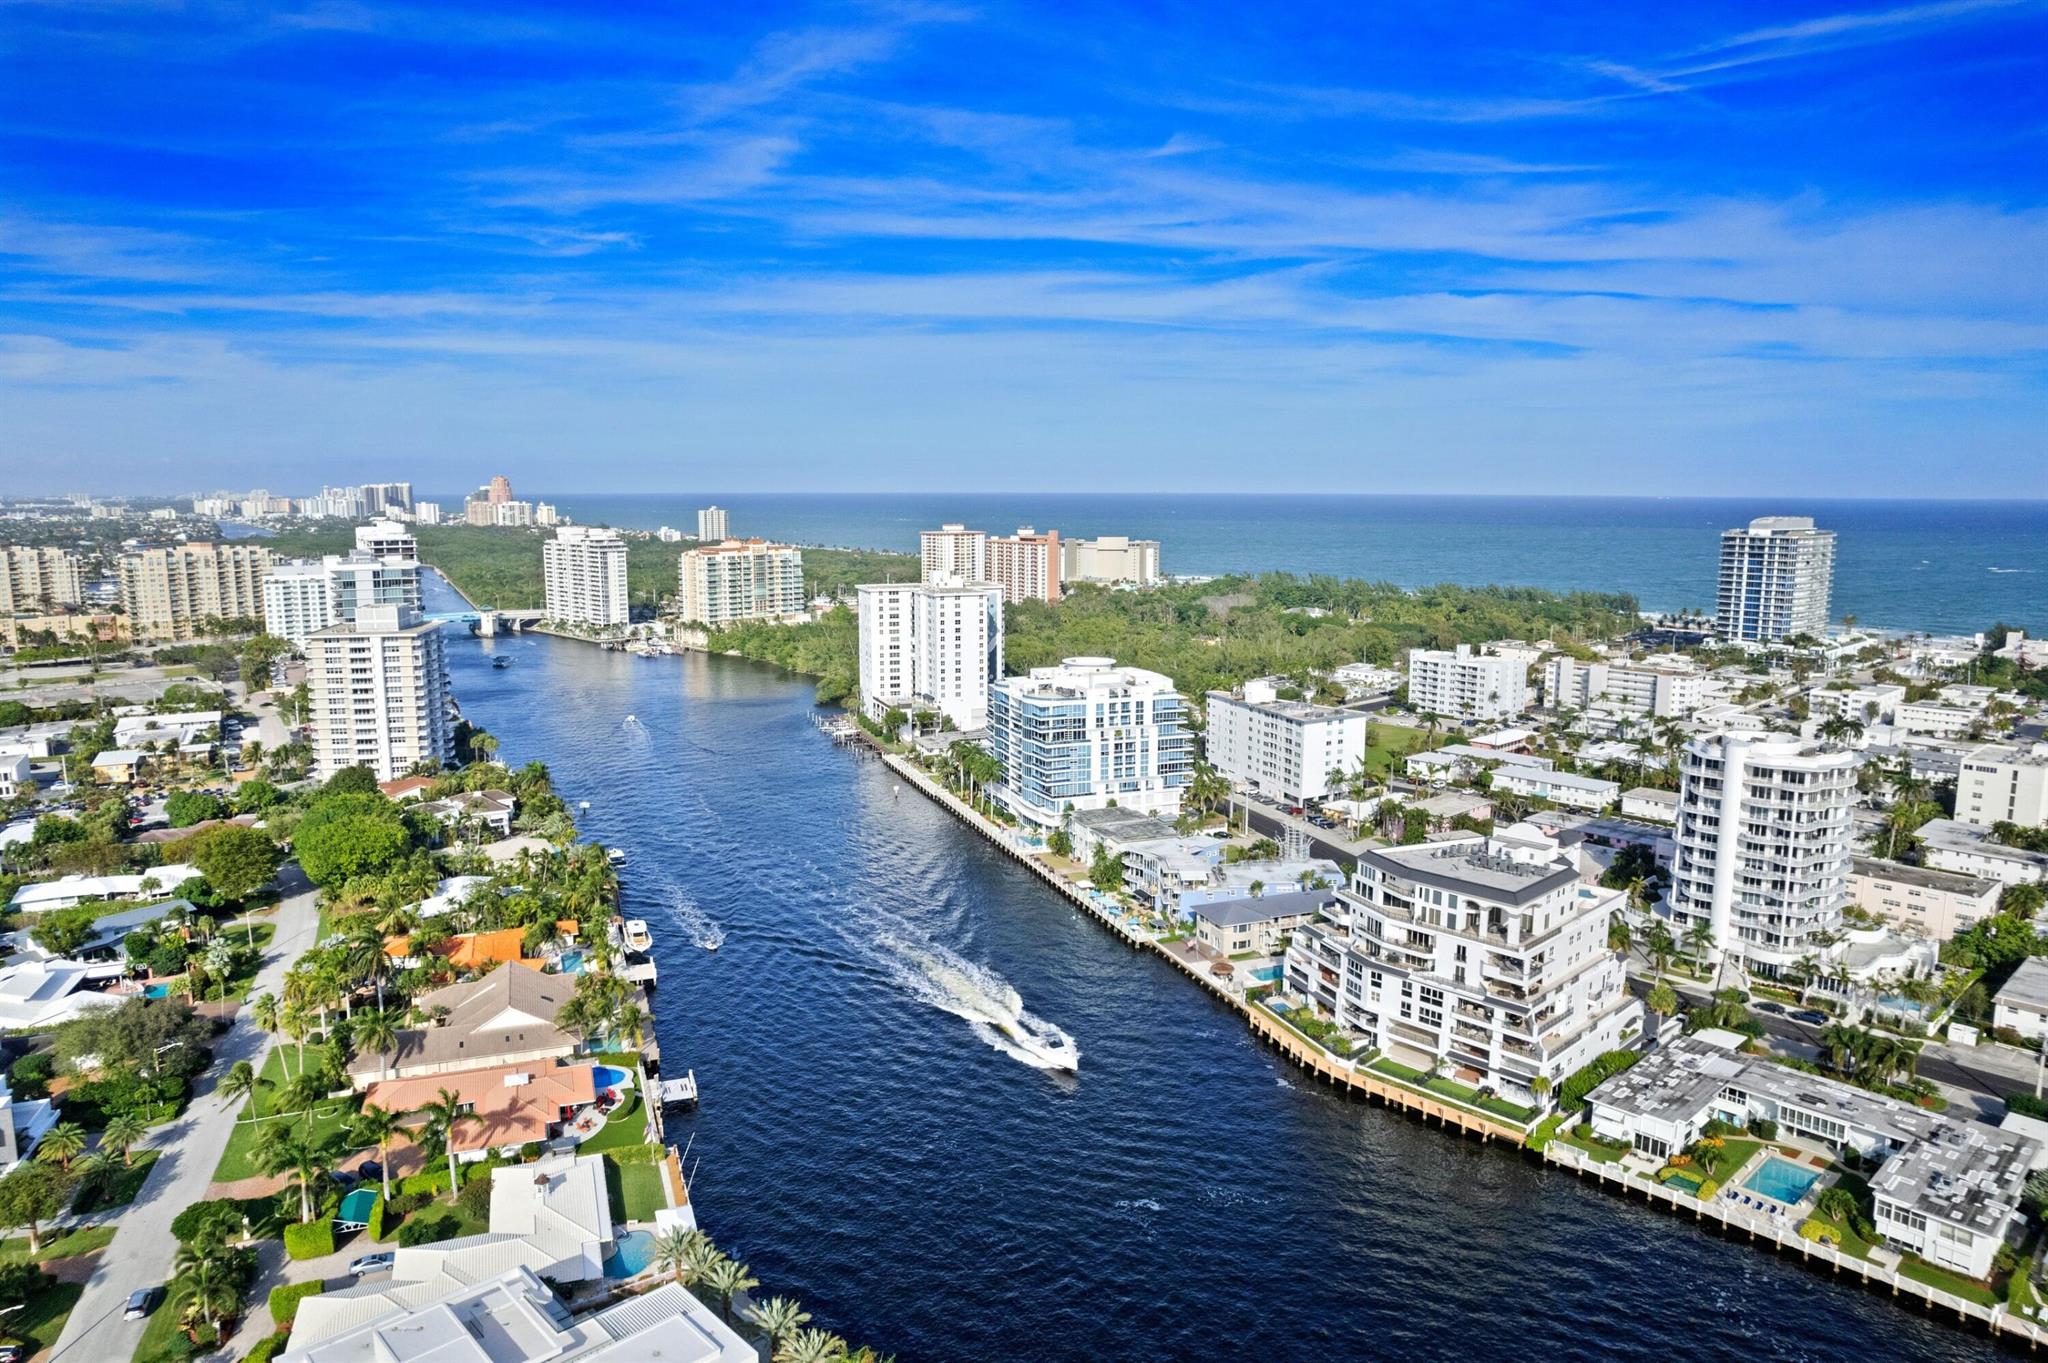 Breathtaking Intracoastal Waterfront Views in Fort Lauderdale's Boutique Style Building, La Cascade! Absolutely Pristine & Fully Renovated 3 BR Condo! Spectacular Waterfront Views from HUGE Private Balcony | STUNNING Eat-In Chef's Kitchen | White Cabinets | Natural Granite Counters | Wine Refrigerator | New S/S Appliances | Kitchen Bar | Pantry | Bright Open Floor Plan | Large 8' Impact Sliders | Custom & Recessed LED Lighting | Smooth Ceilings | Travertine & Marble Floors | Washer/Dryer in Unit. Impressive Master Bedroom, Large Walk-In Closet, Huge Glass Shower | Bidet | Dual Sink Vanity. All Impacted Windows & Doors! Community Pool | Walk to Beach | Boat Docks | Minutes to Downtown Las Olas with Fine Dining & Luxury Shopping! Assigned Covered Parking! Present All Offers